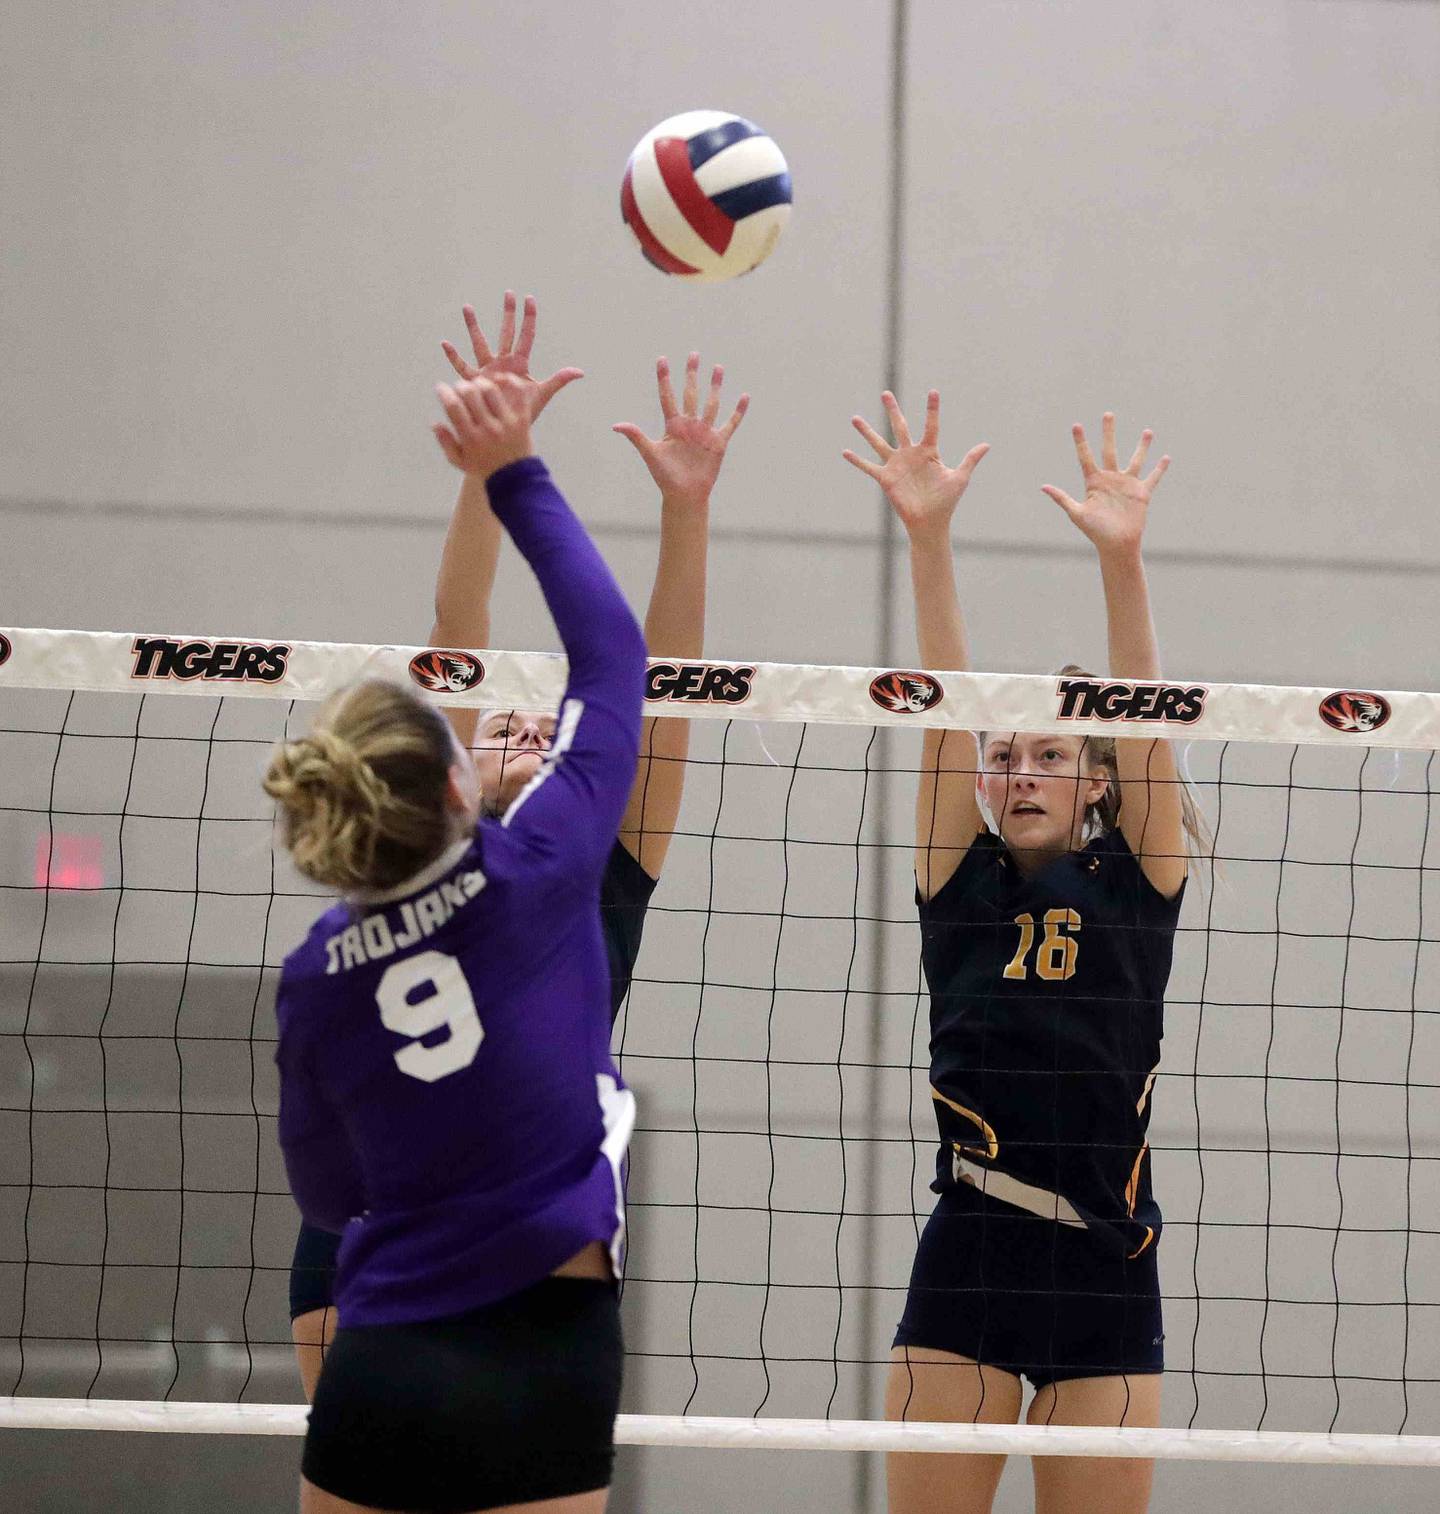 Brian Hill/bhill@dailyherald.com
Downers Grove North’s Kelley Crowley (9) hits the ball past Neuqua Valley’s Anja Kelly (11) and Eleanor O’Neal Saturday September 17, 2022 in Wheaton.